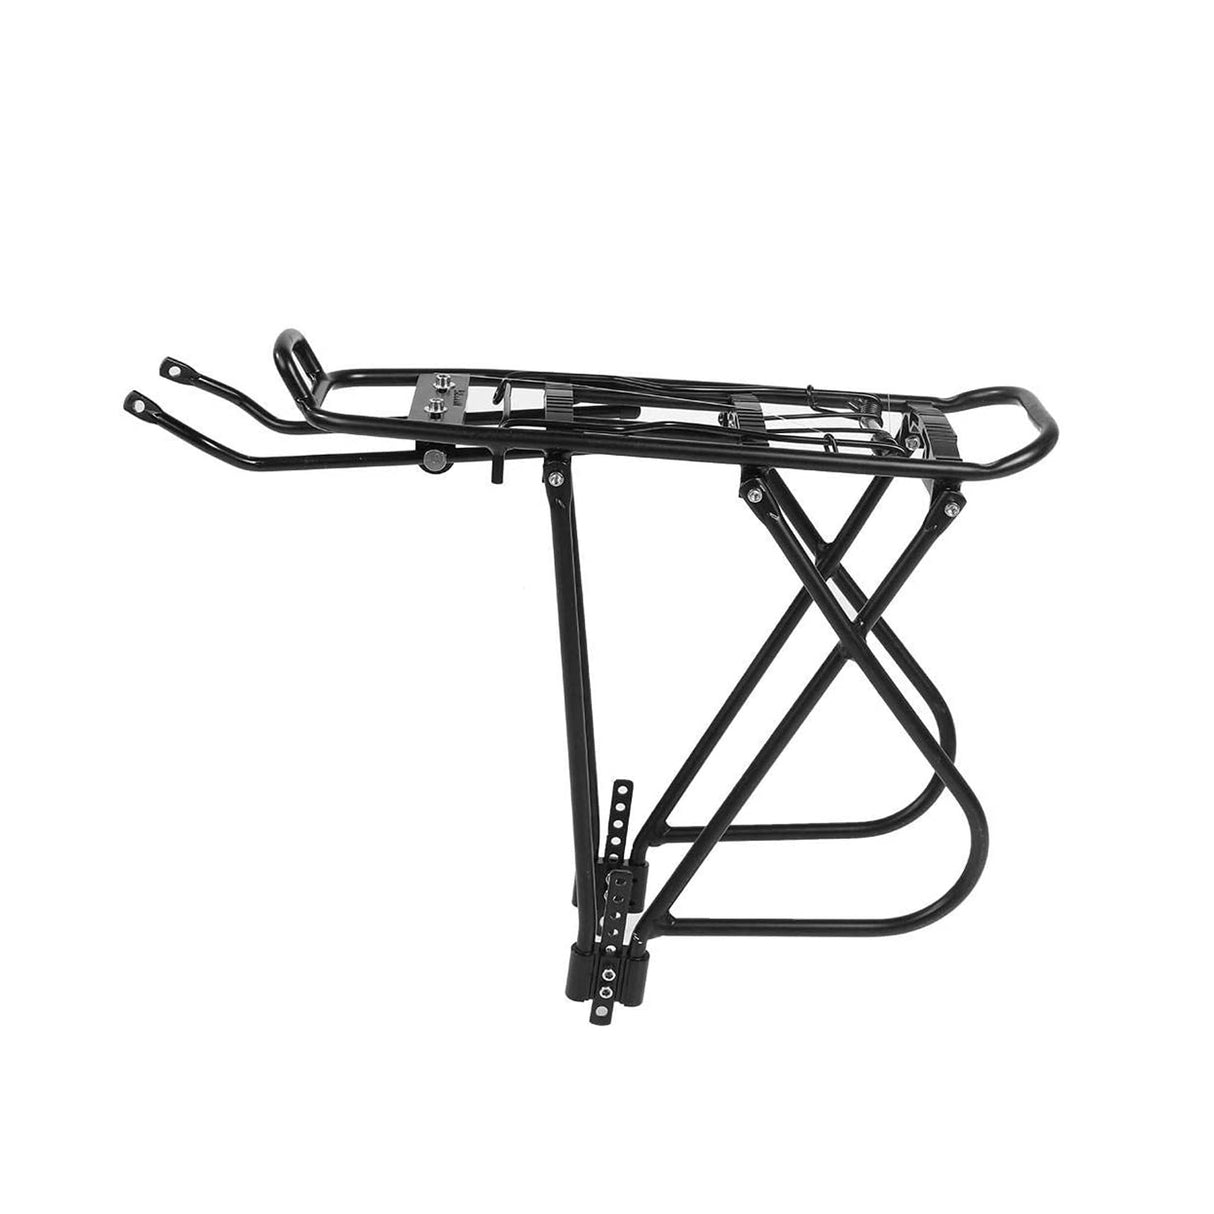 Spartan Bicycle Rear Carrier